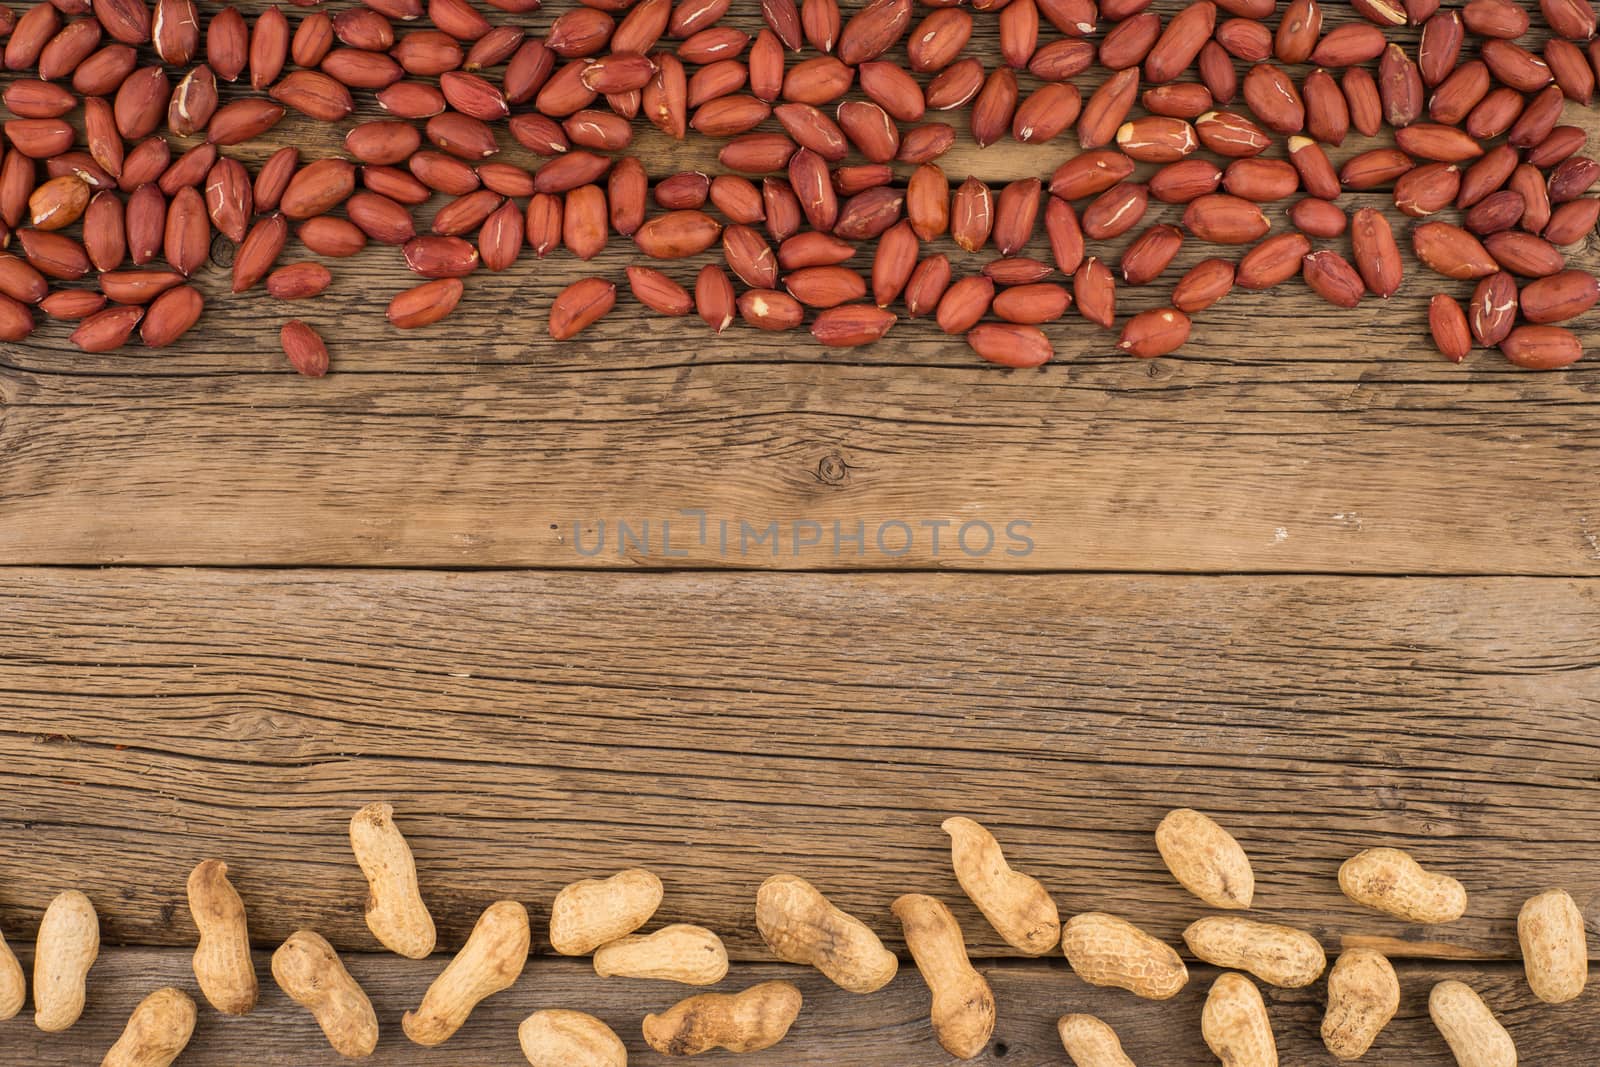 Peanuts on the background of the old wooden table. by DGolbay